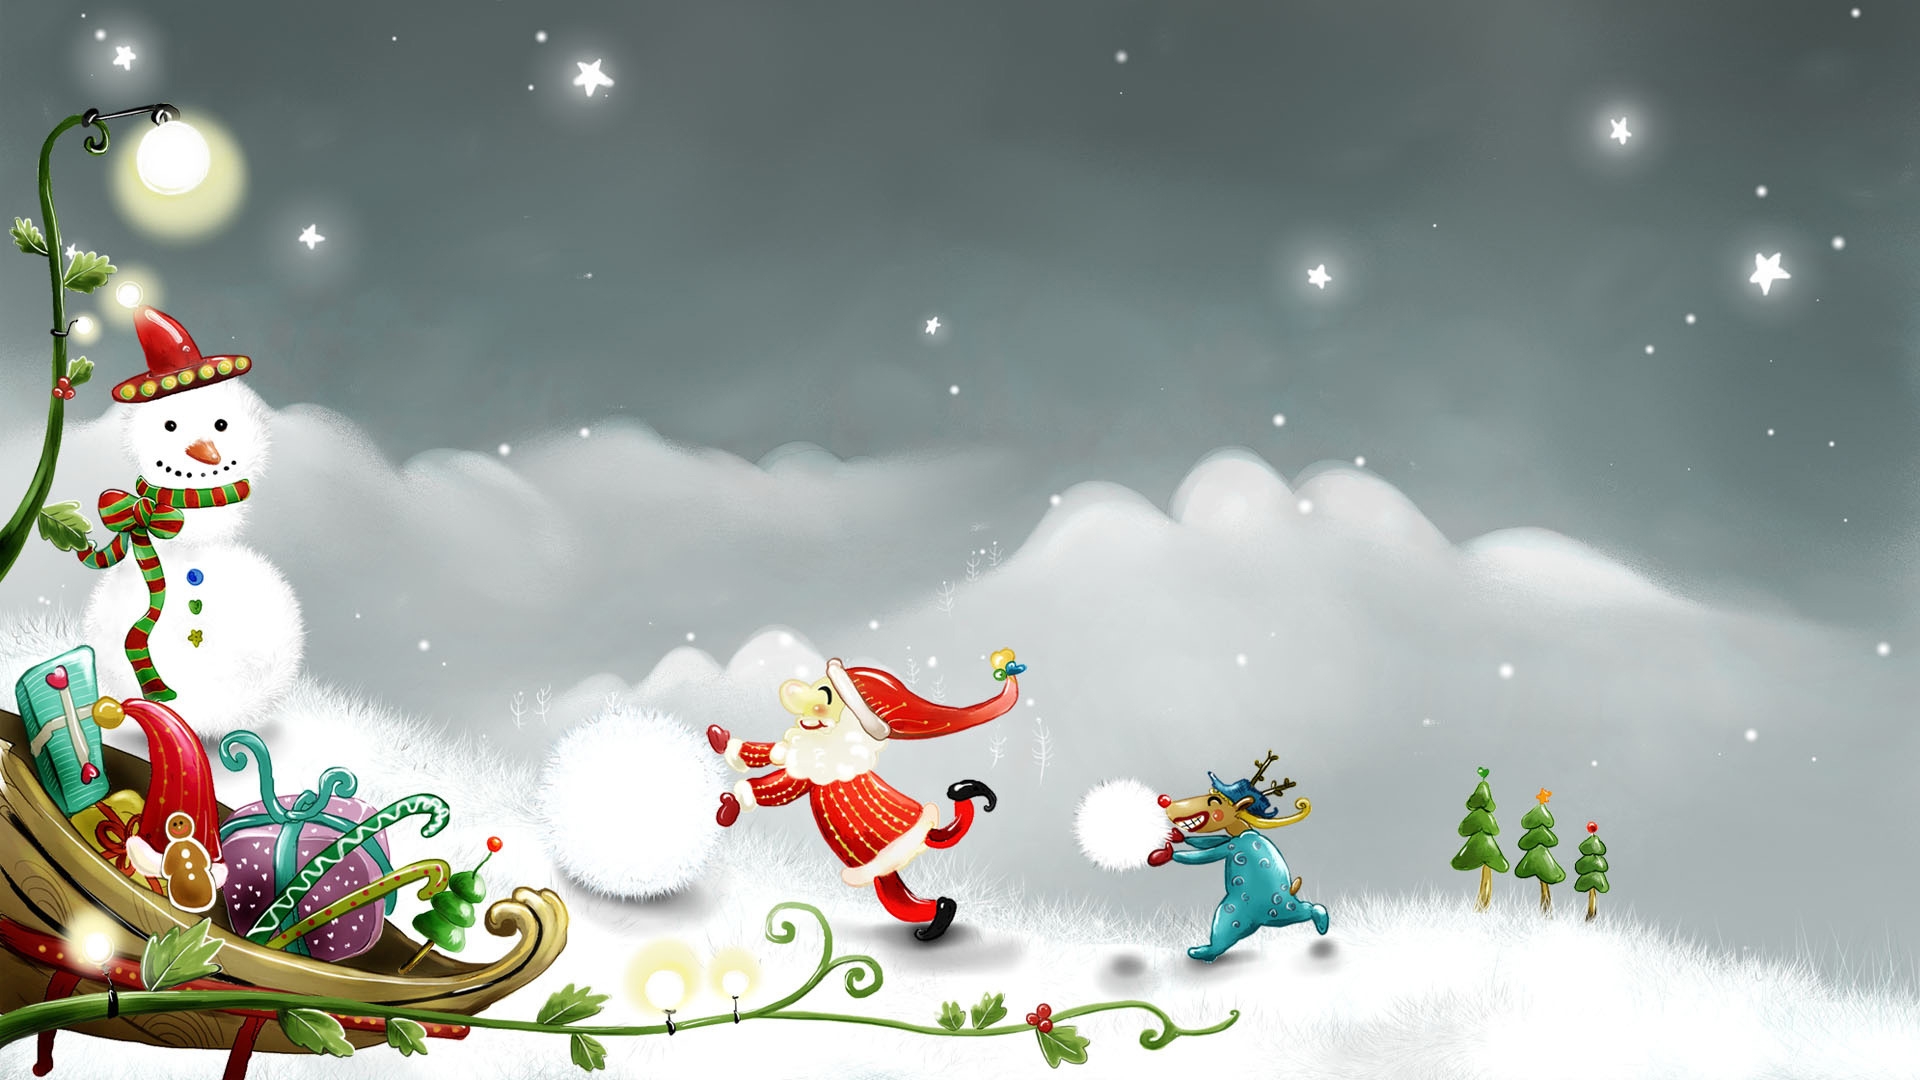 Snowman and Santa Claus for 1920 x 1080 HDTV 1080p resolution